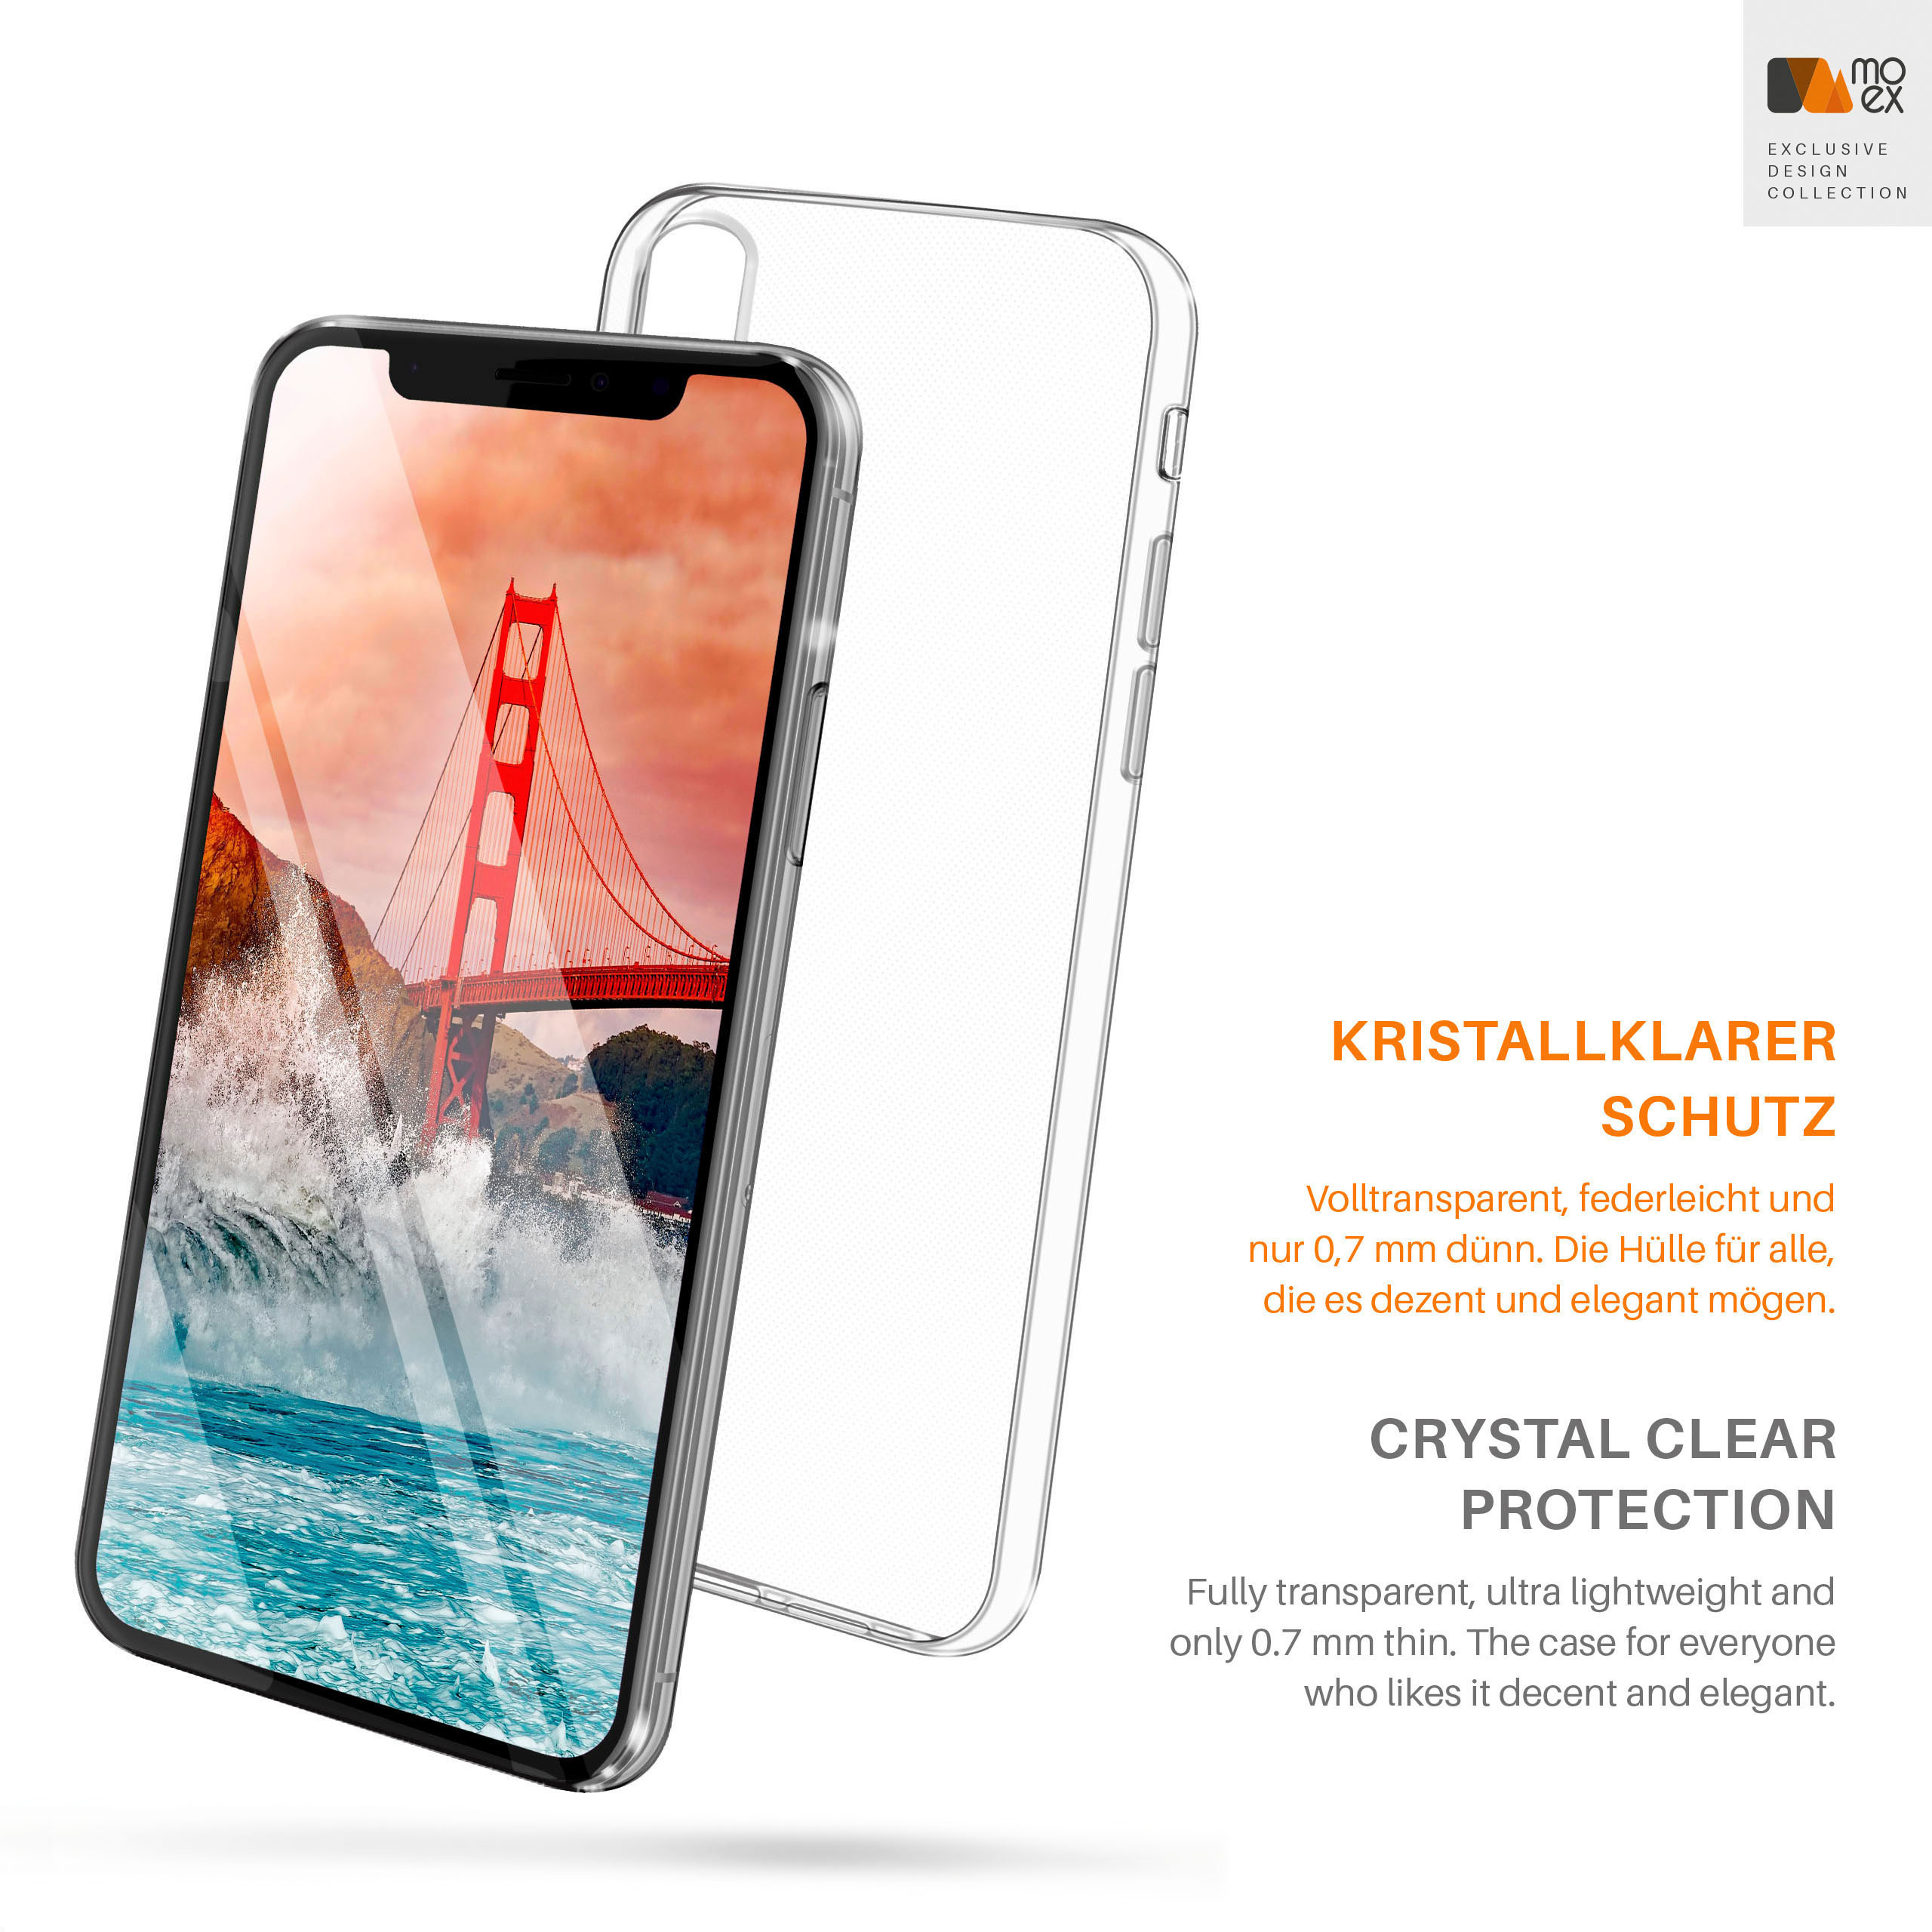 Backcover, Case, iPhone XS, Apple, MOEX / Aero X iPhone Crystal-Clear